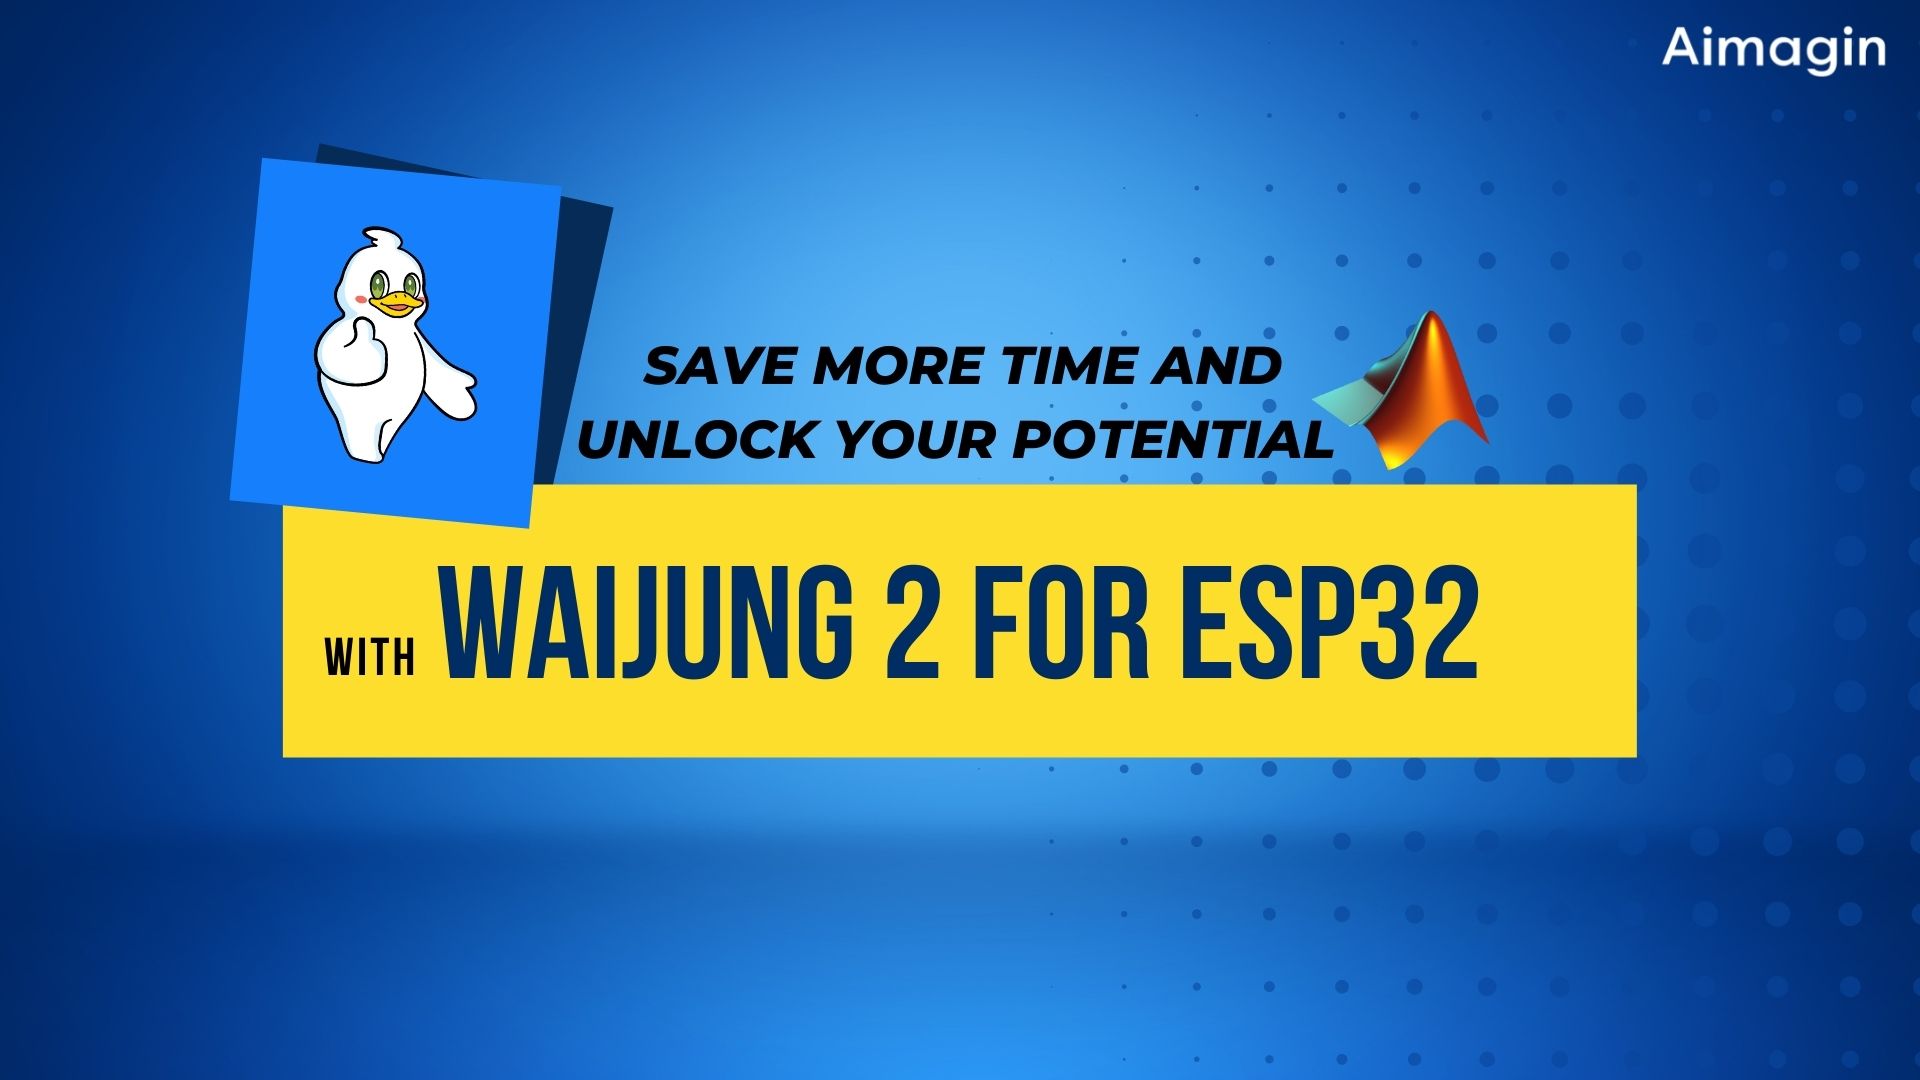 Save more time and unlock your potential with Waijung 2 for ESP32